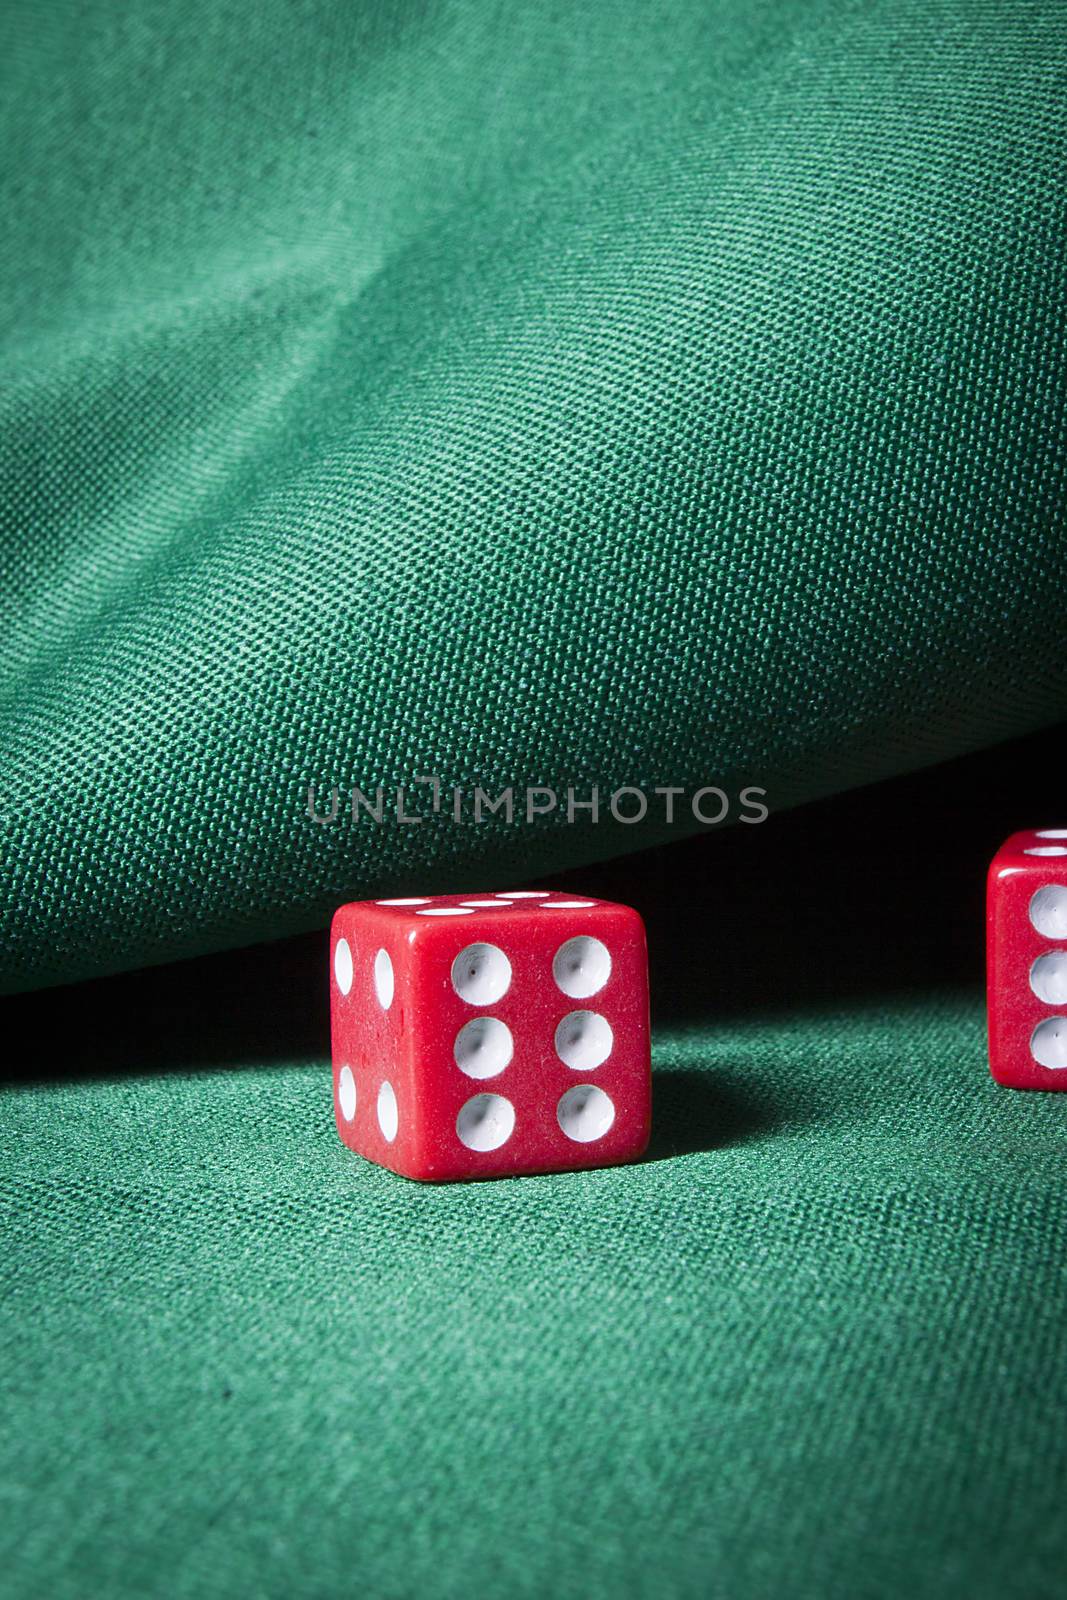 Dice on a table with green cloth